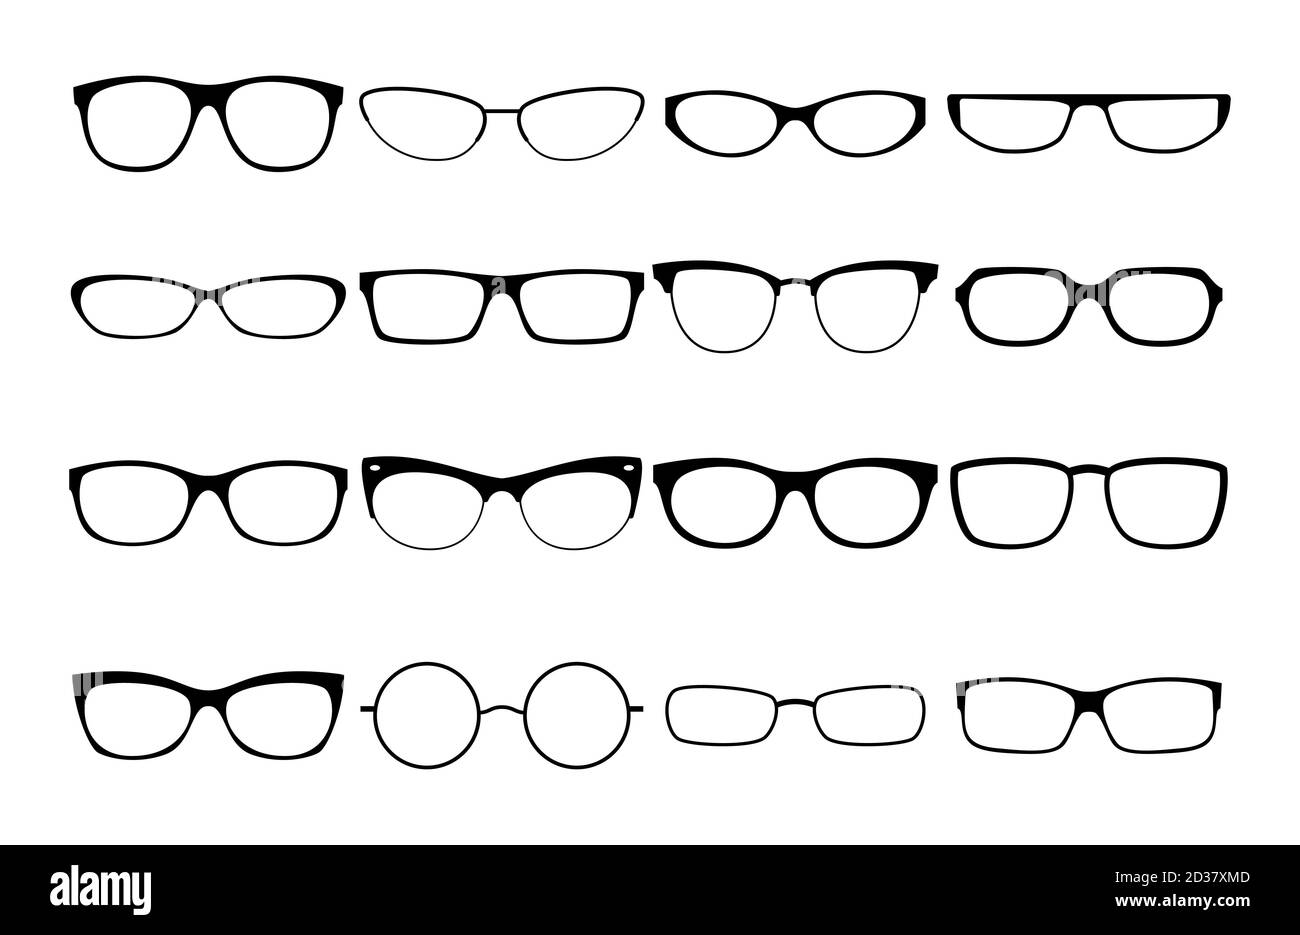 Black frame spectacles Stock Vector Images - Alamy